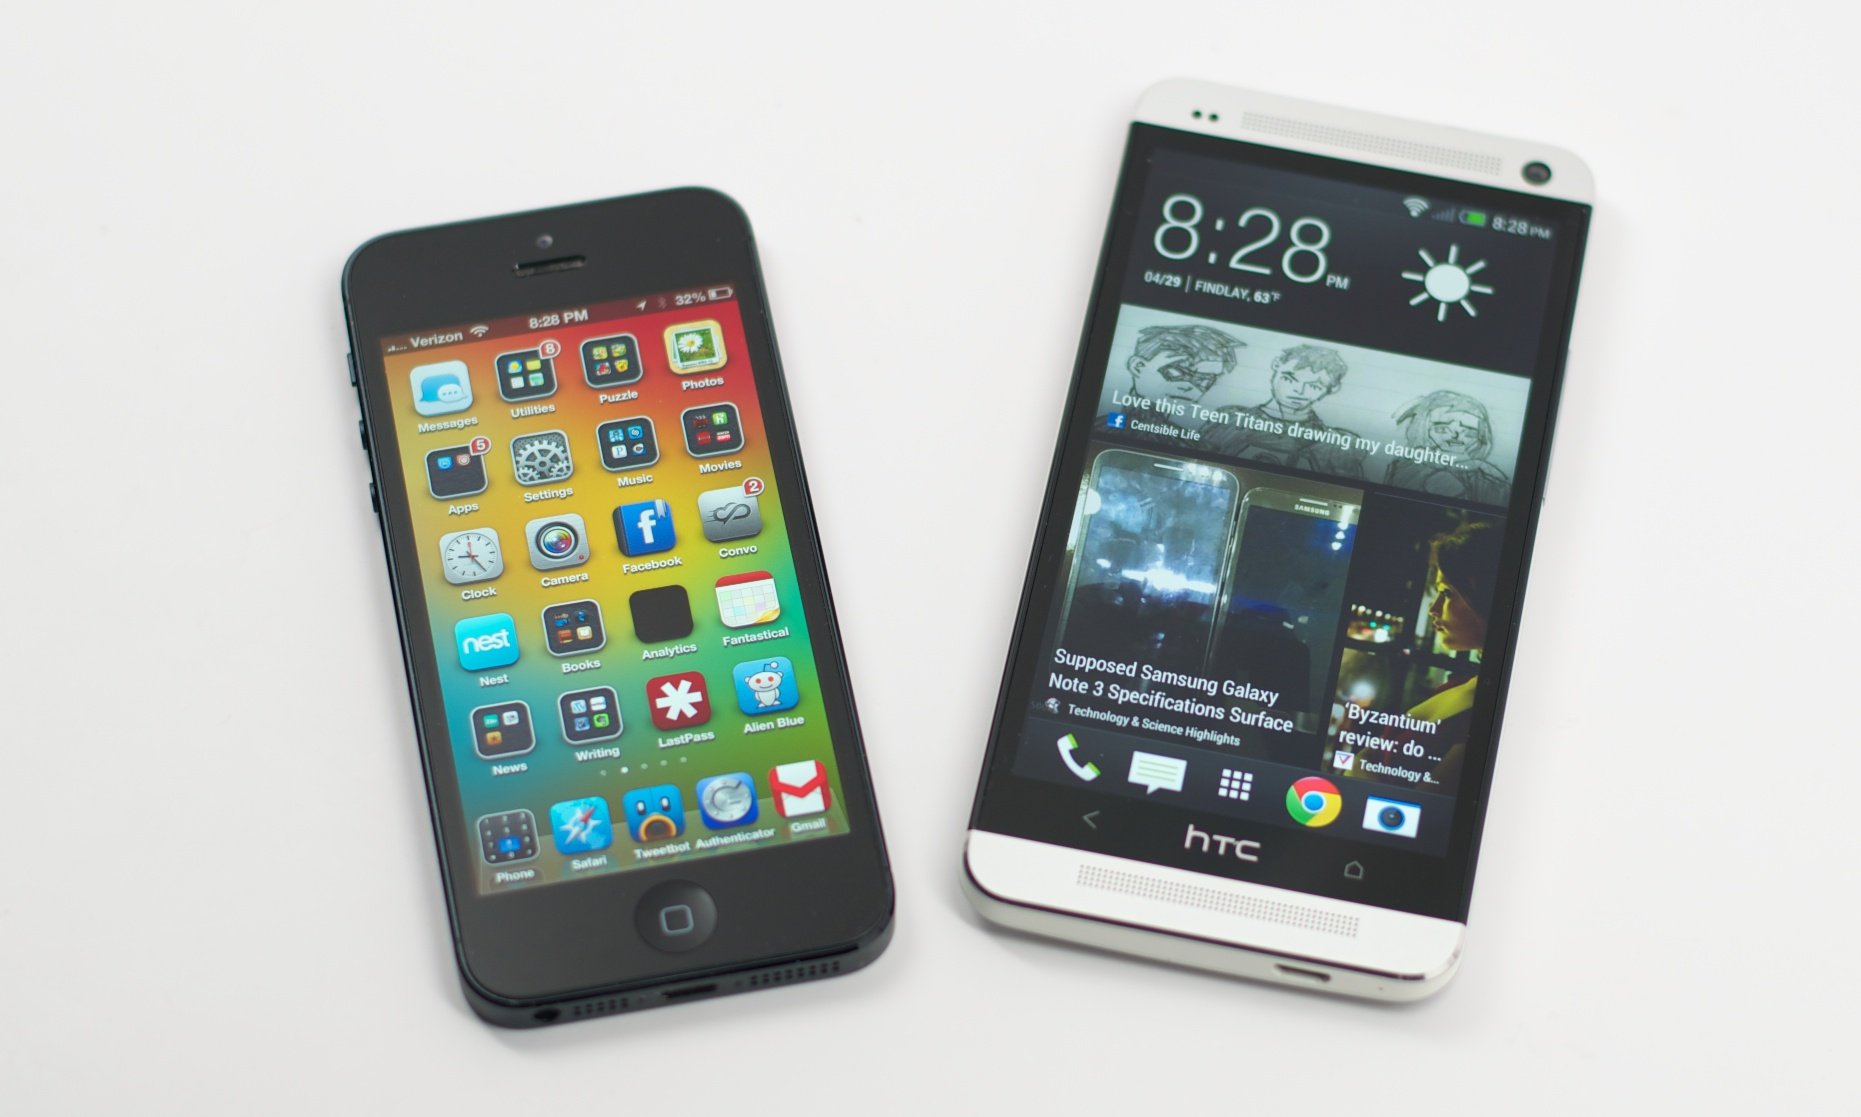 The iPhone 5 and the HTC One offer a premium smartphone experience thanks to great build quality and mature software, but which one should you buy?